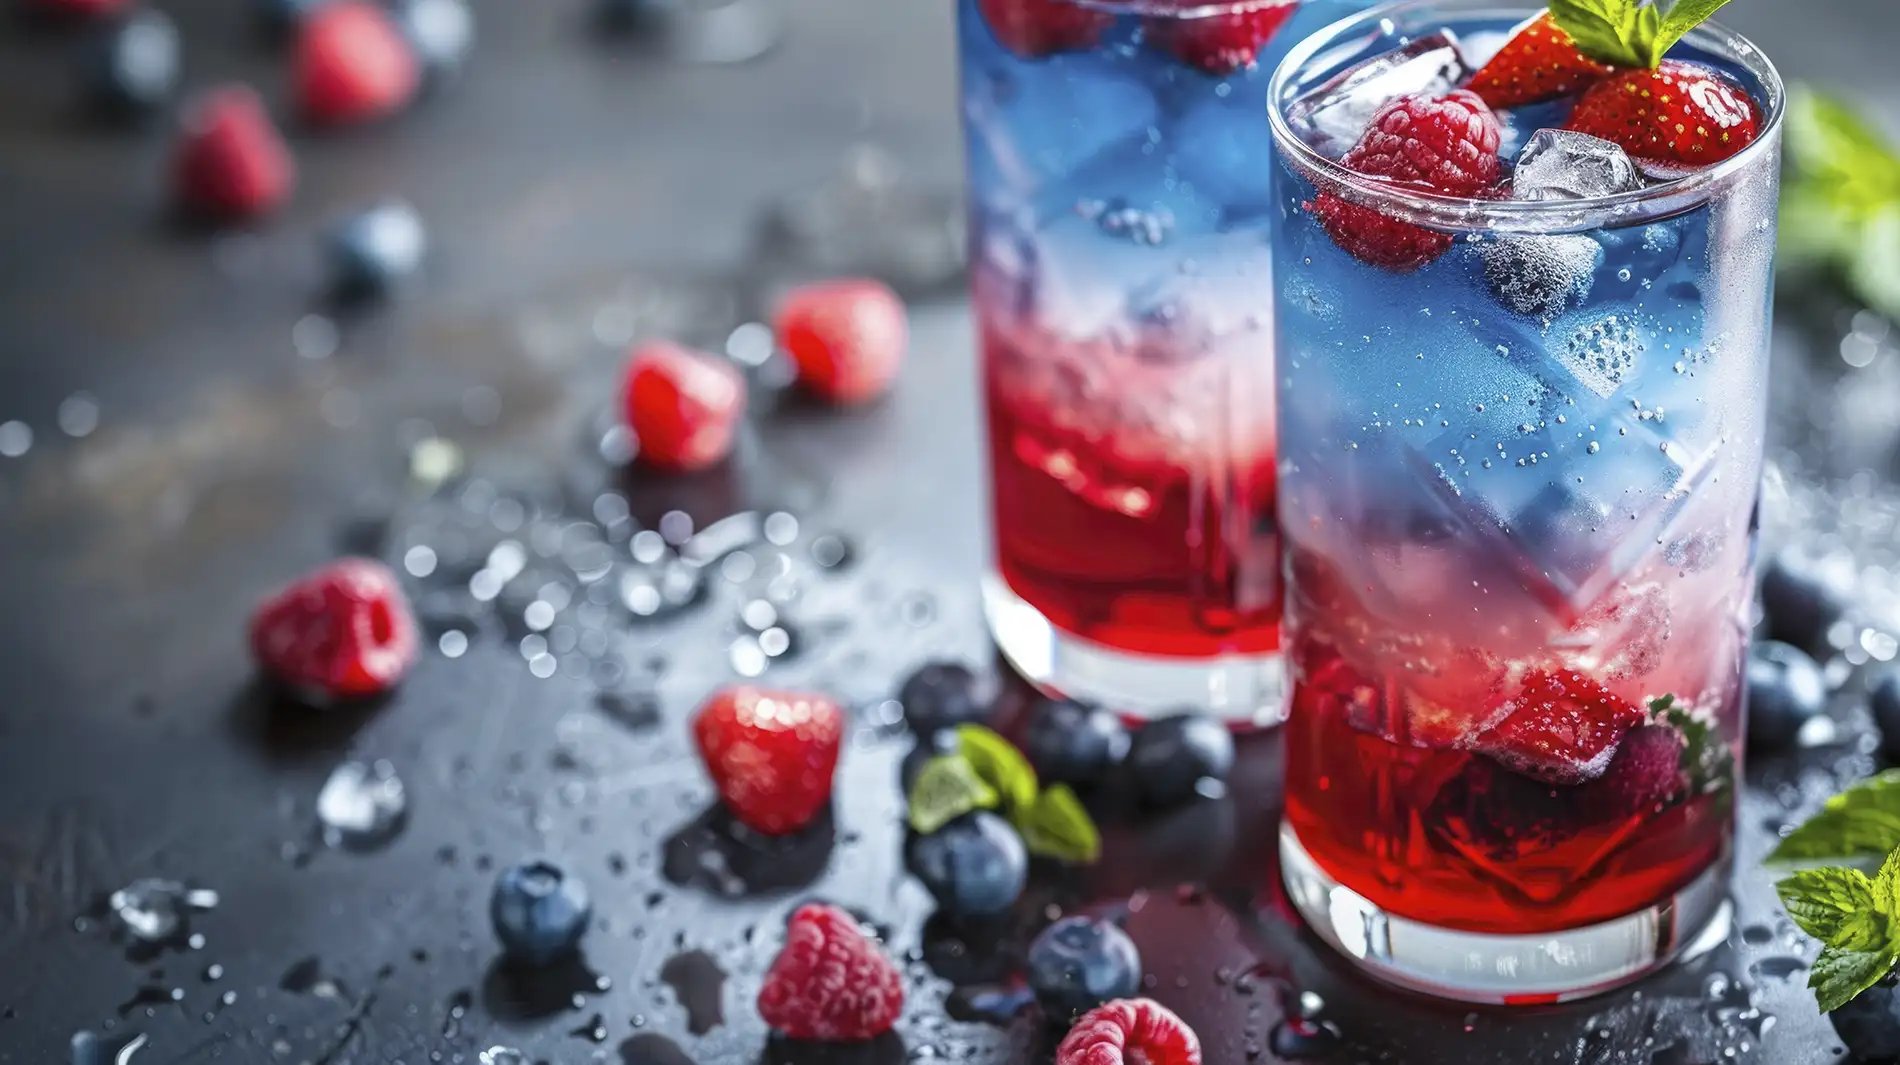 A red, white, and blue themed cocktail for the Fourth of July using raspberries and blueberries for color and accents